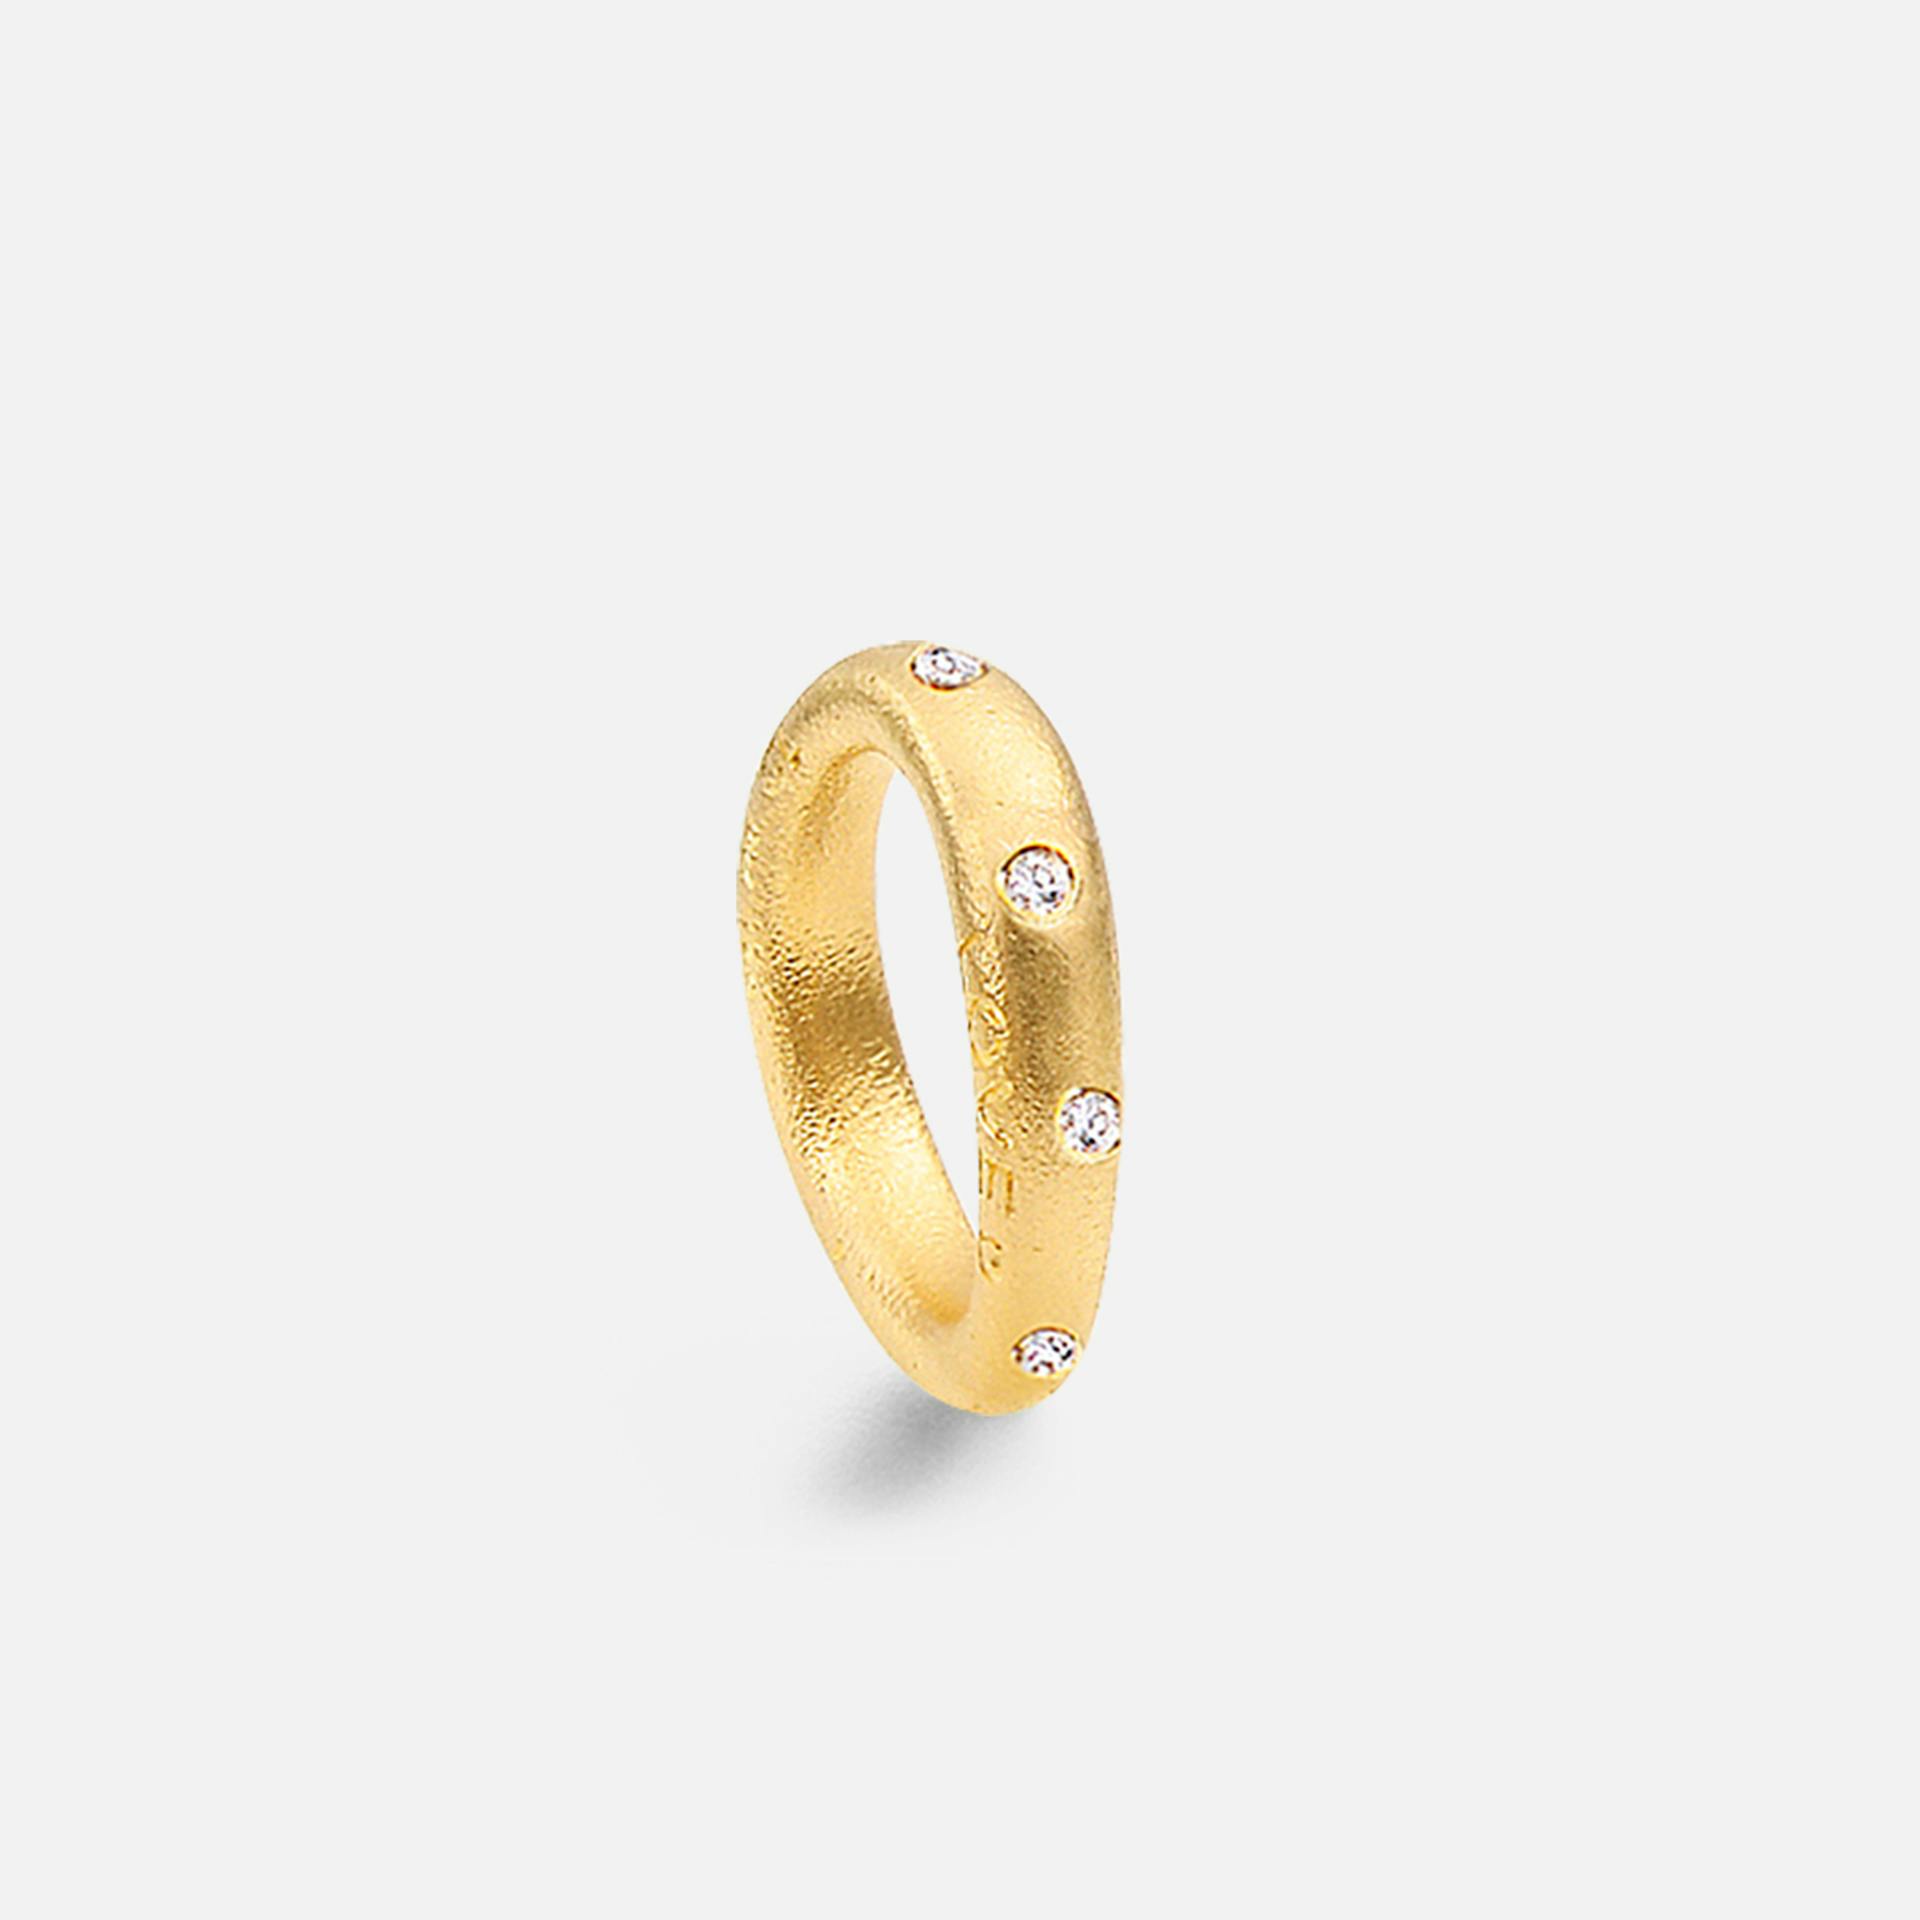 Love ring 4 18k gold textured and diamonds 0.18 ct. TW. VS.